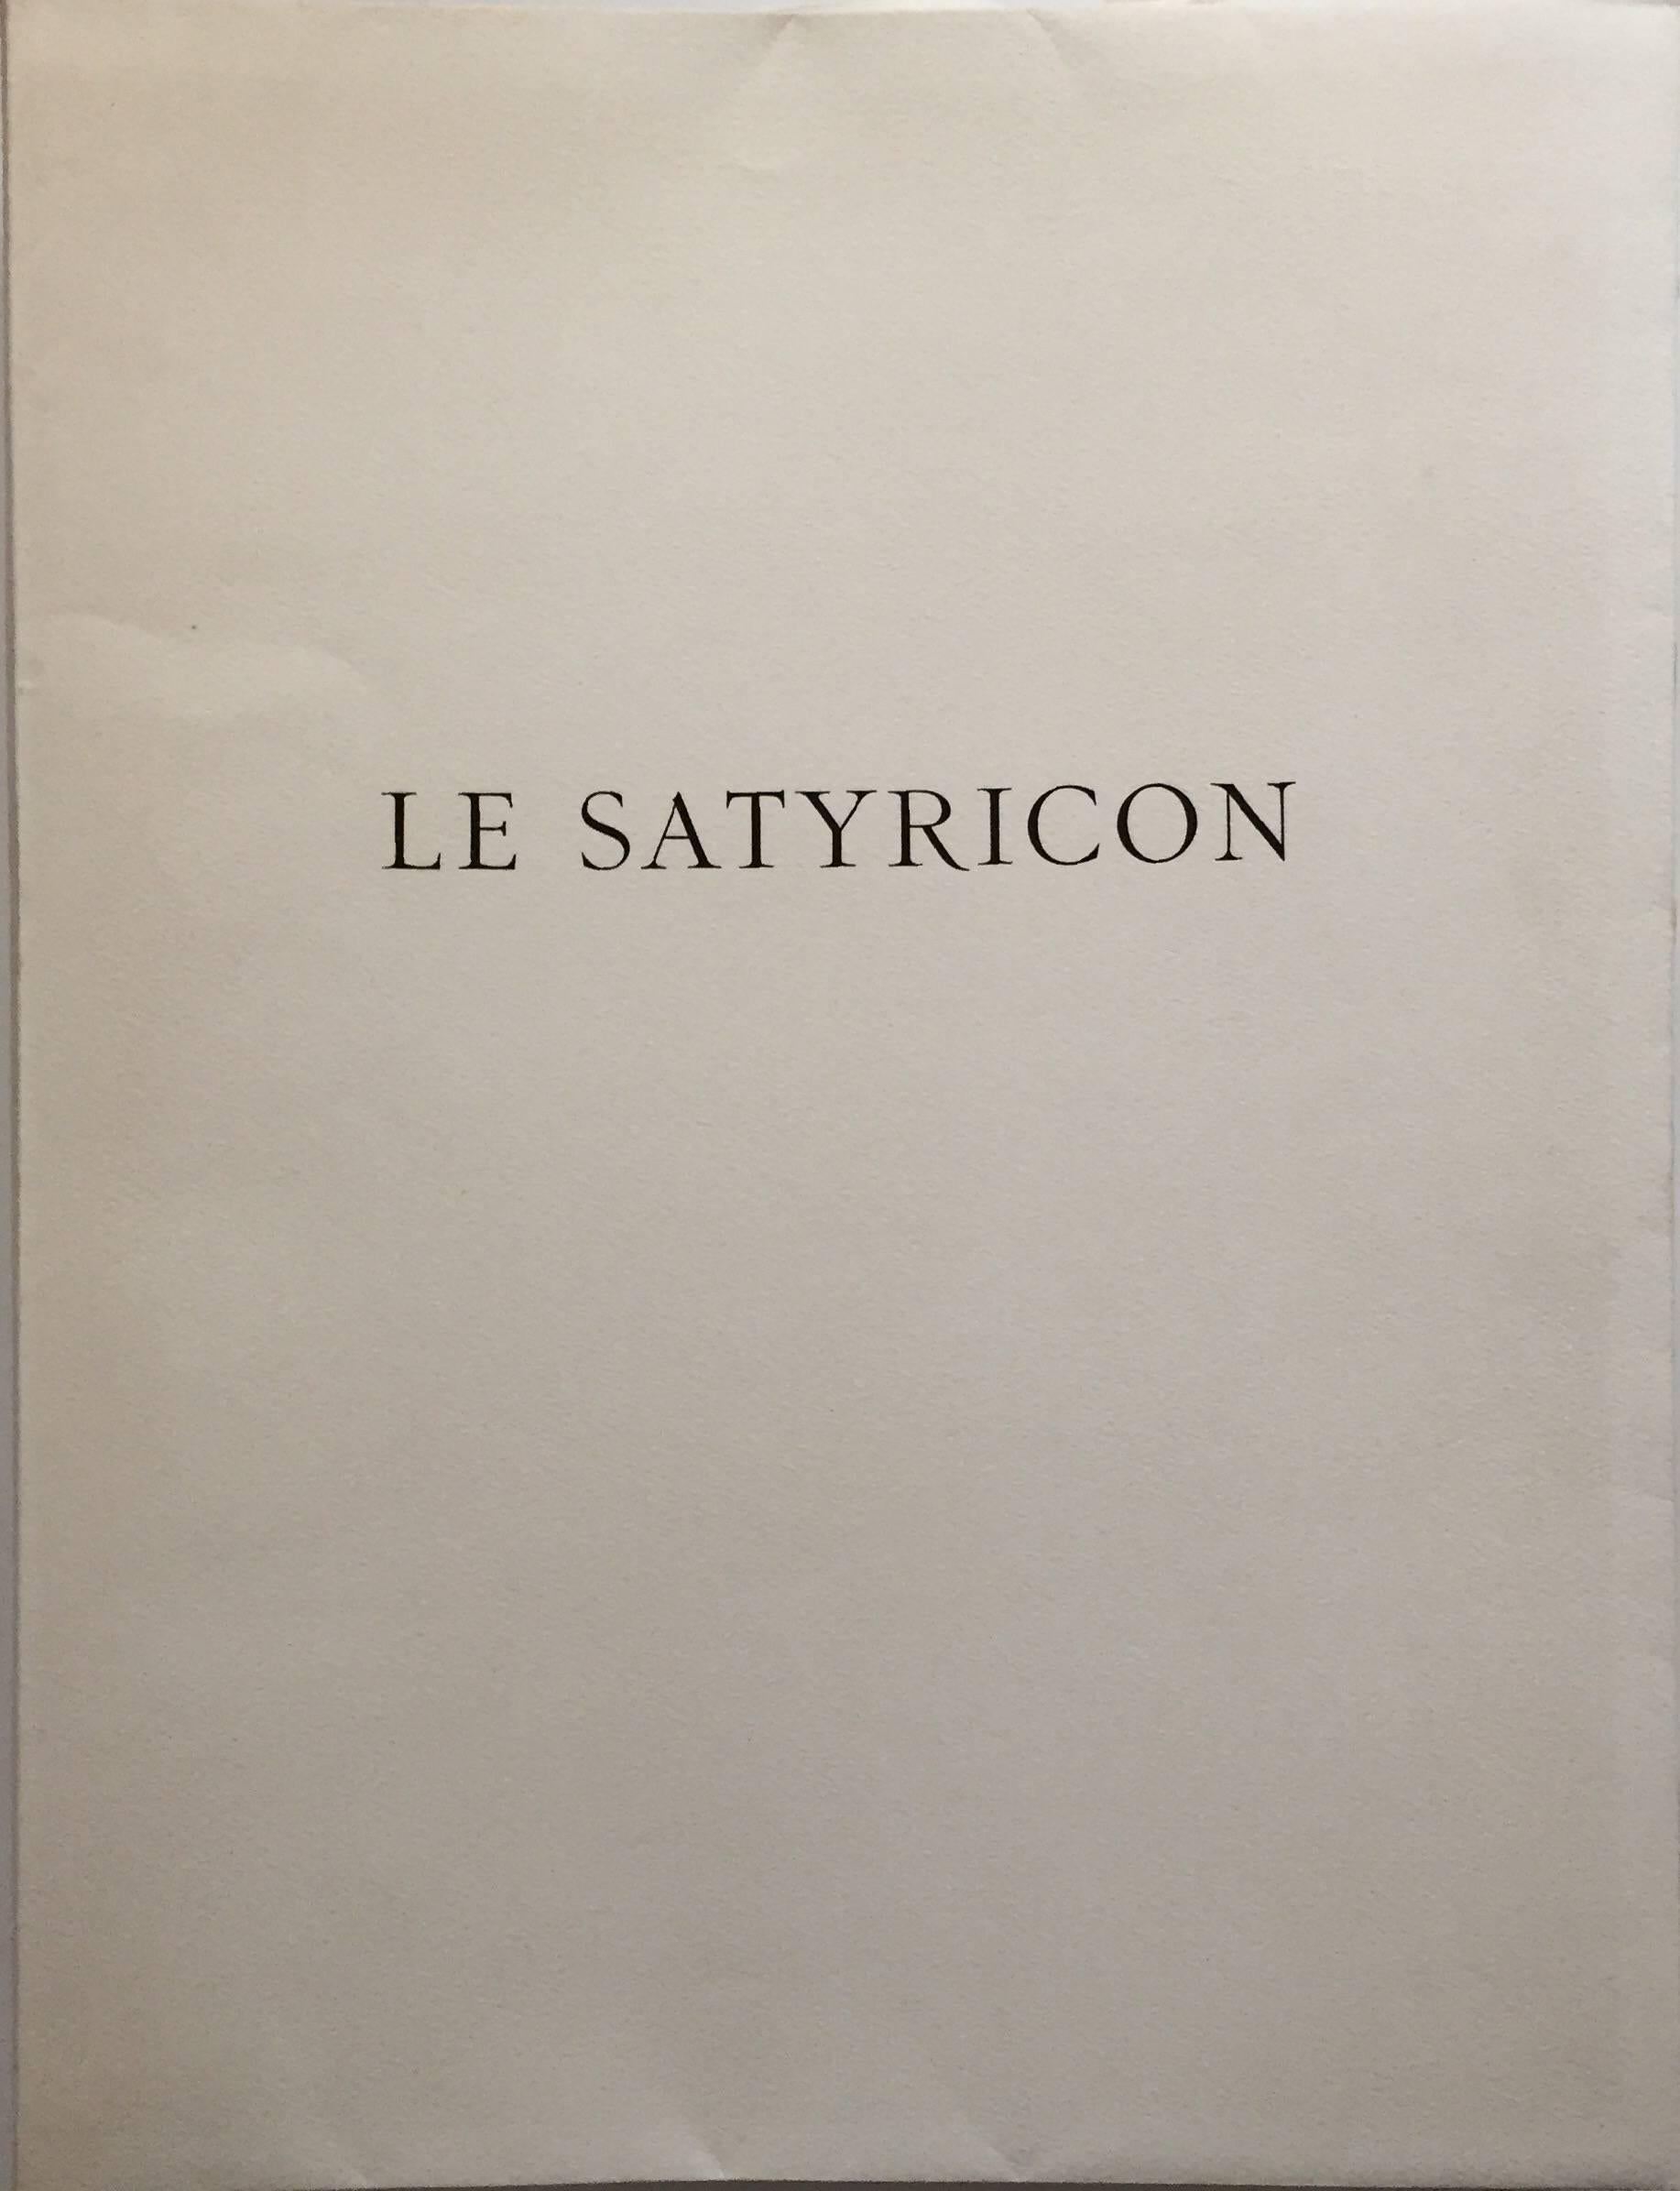 Etching from Le Satyricon  - Print by André Derain